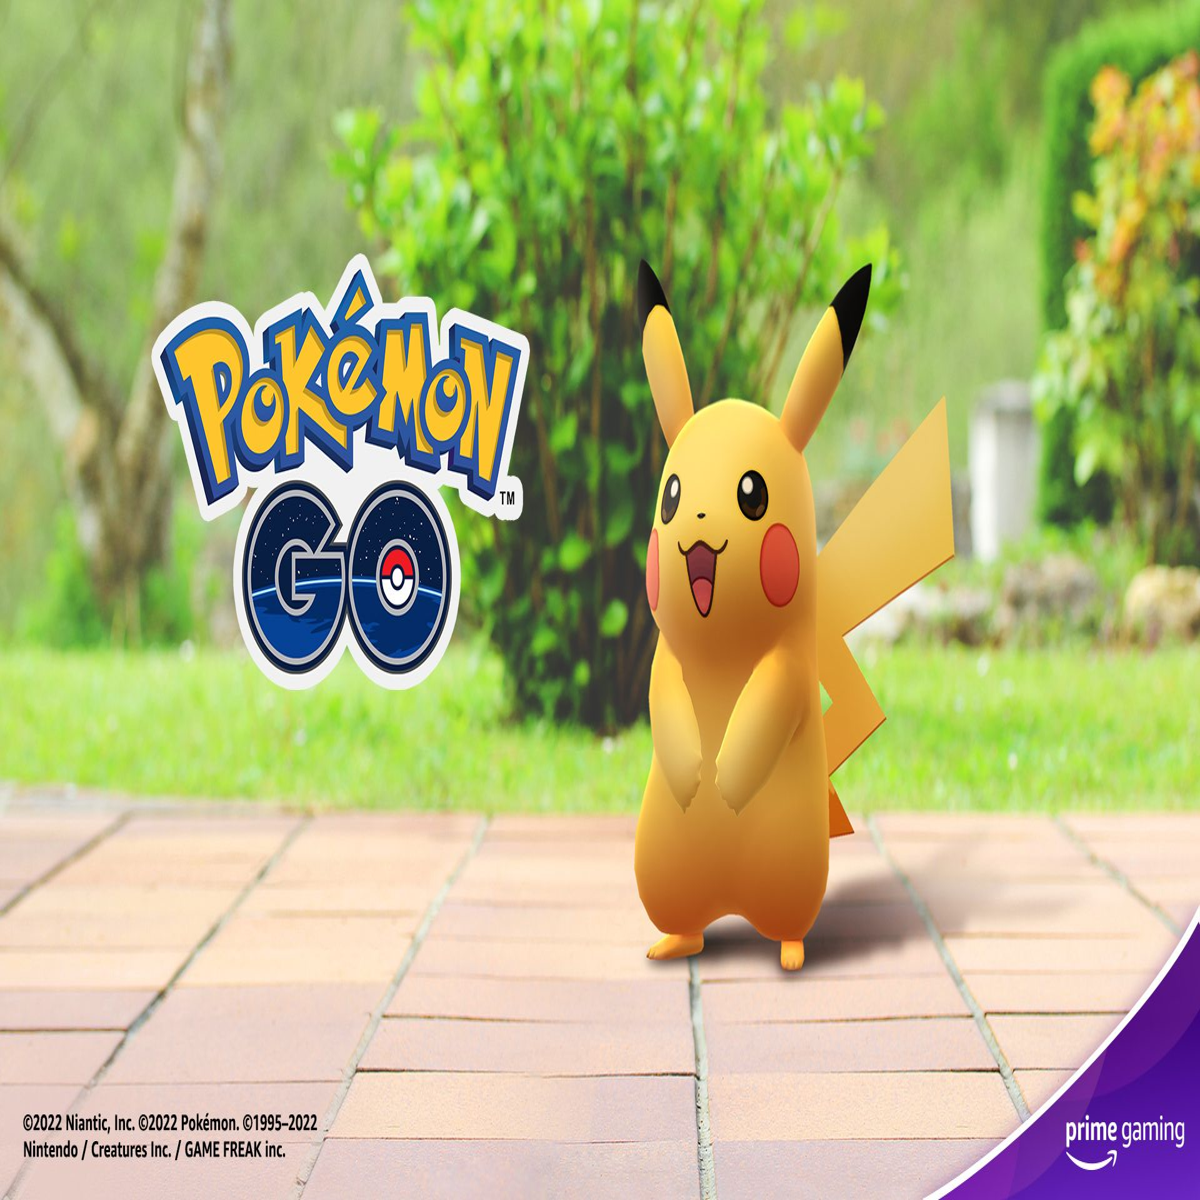 Pokémon GO - Celebrate the Pokémon GO Fest finale with another bundle of  in-game items from Prime Gaming! 👉 gaming..com/pokemongo